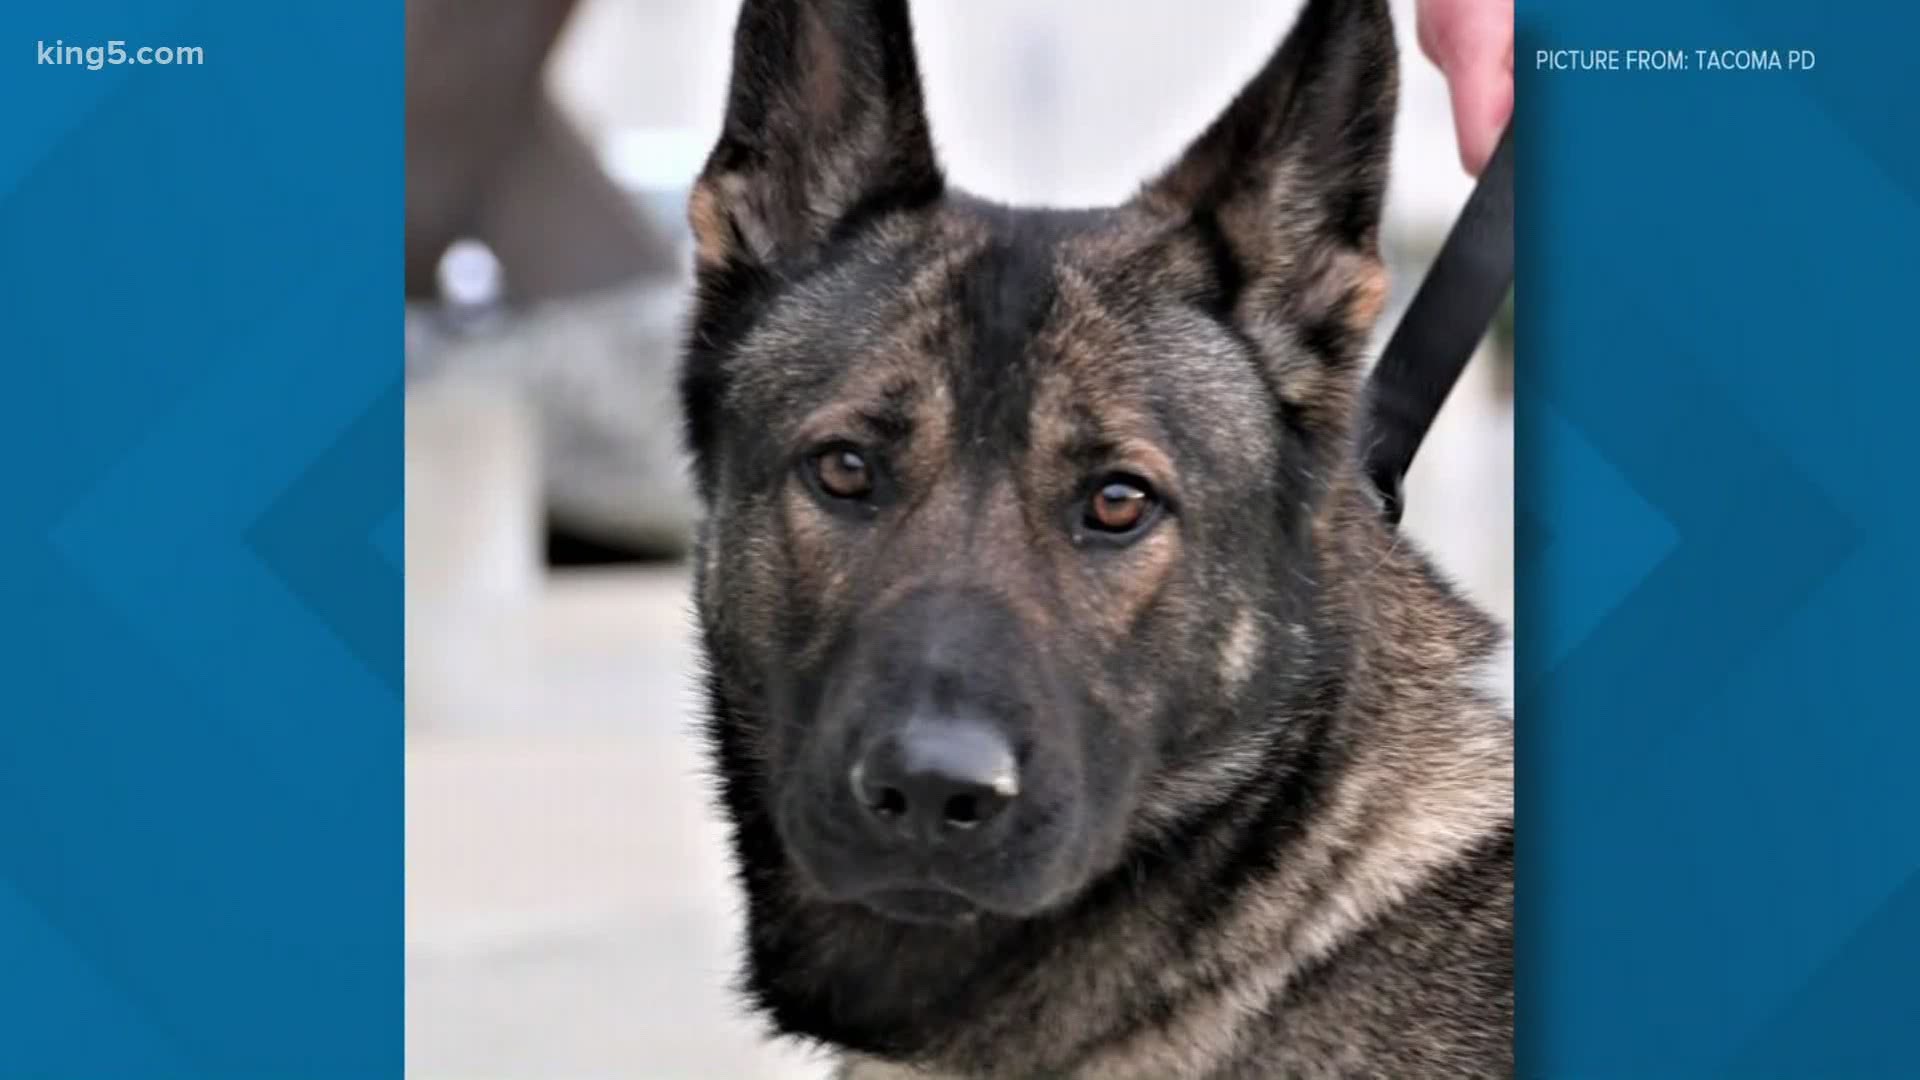 A 2-year-old Tacoma police K9 was shot and killed while pursuing a suspect early Thursday morning. K9 Ronja served with the Tacoma Police Department for 8 months.